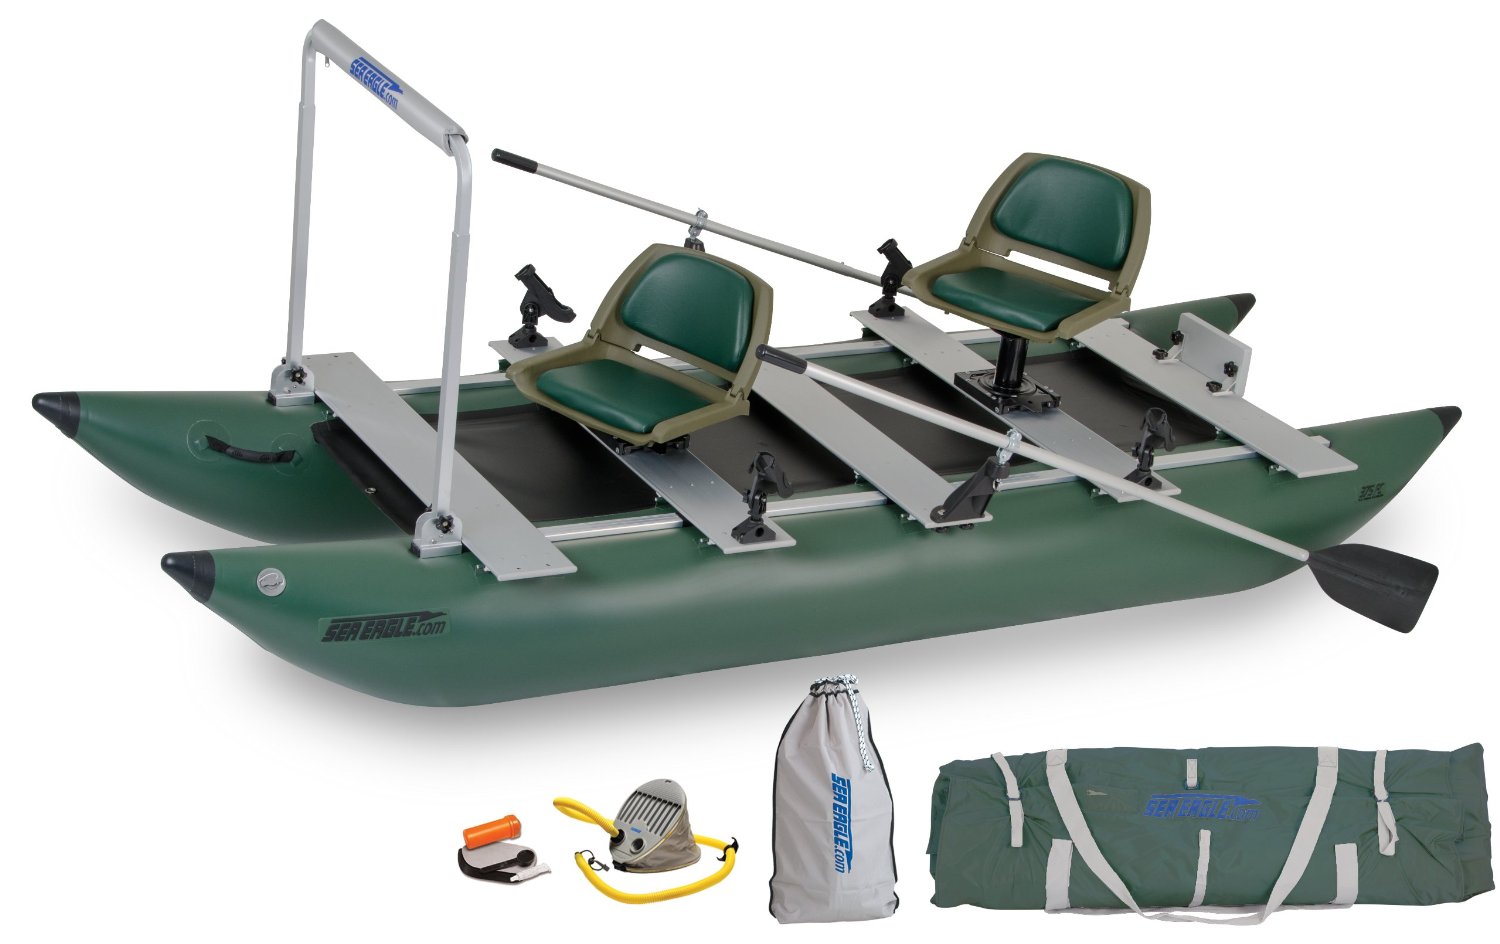 Inflatable Boat Comparison Chart